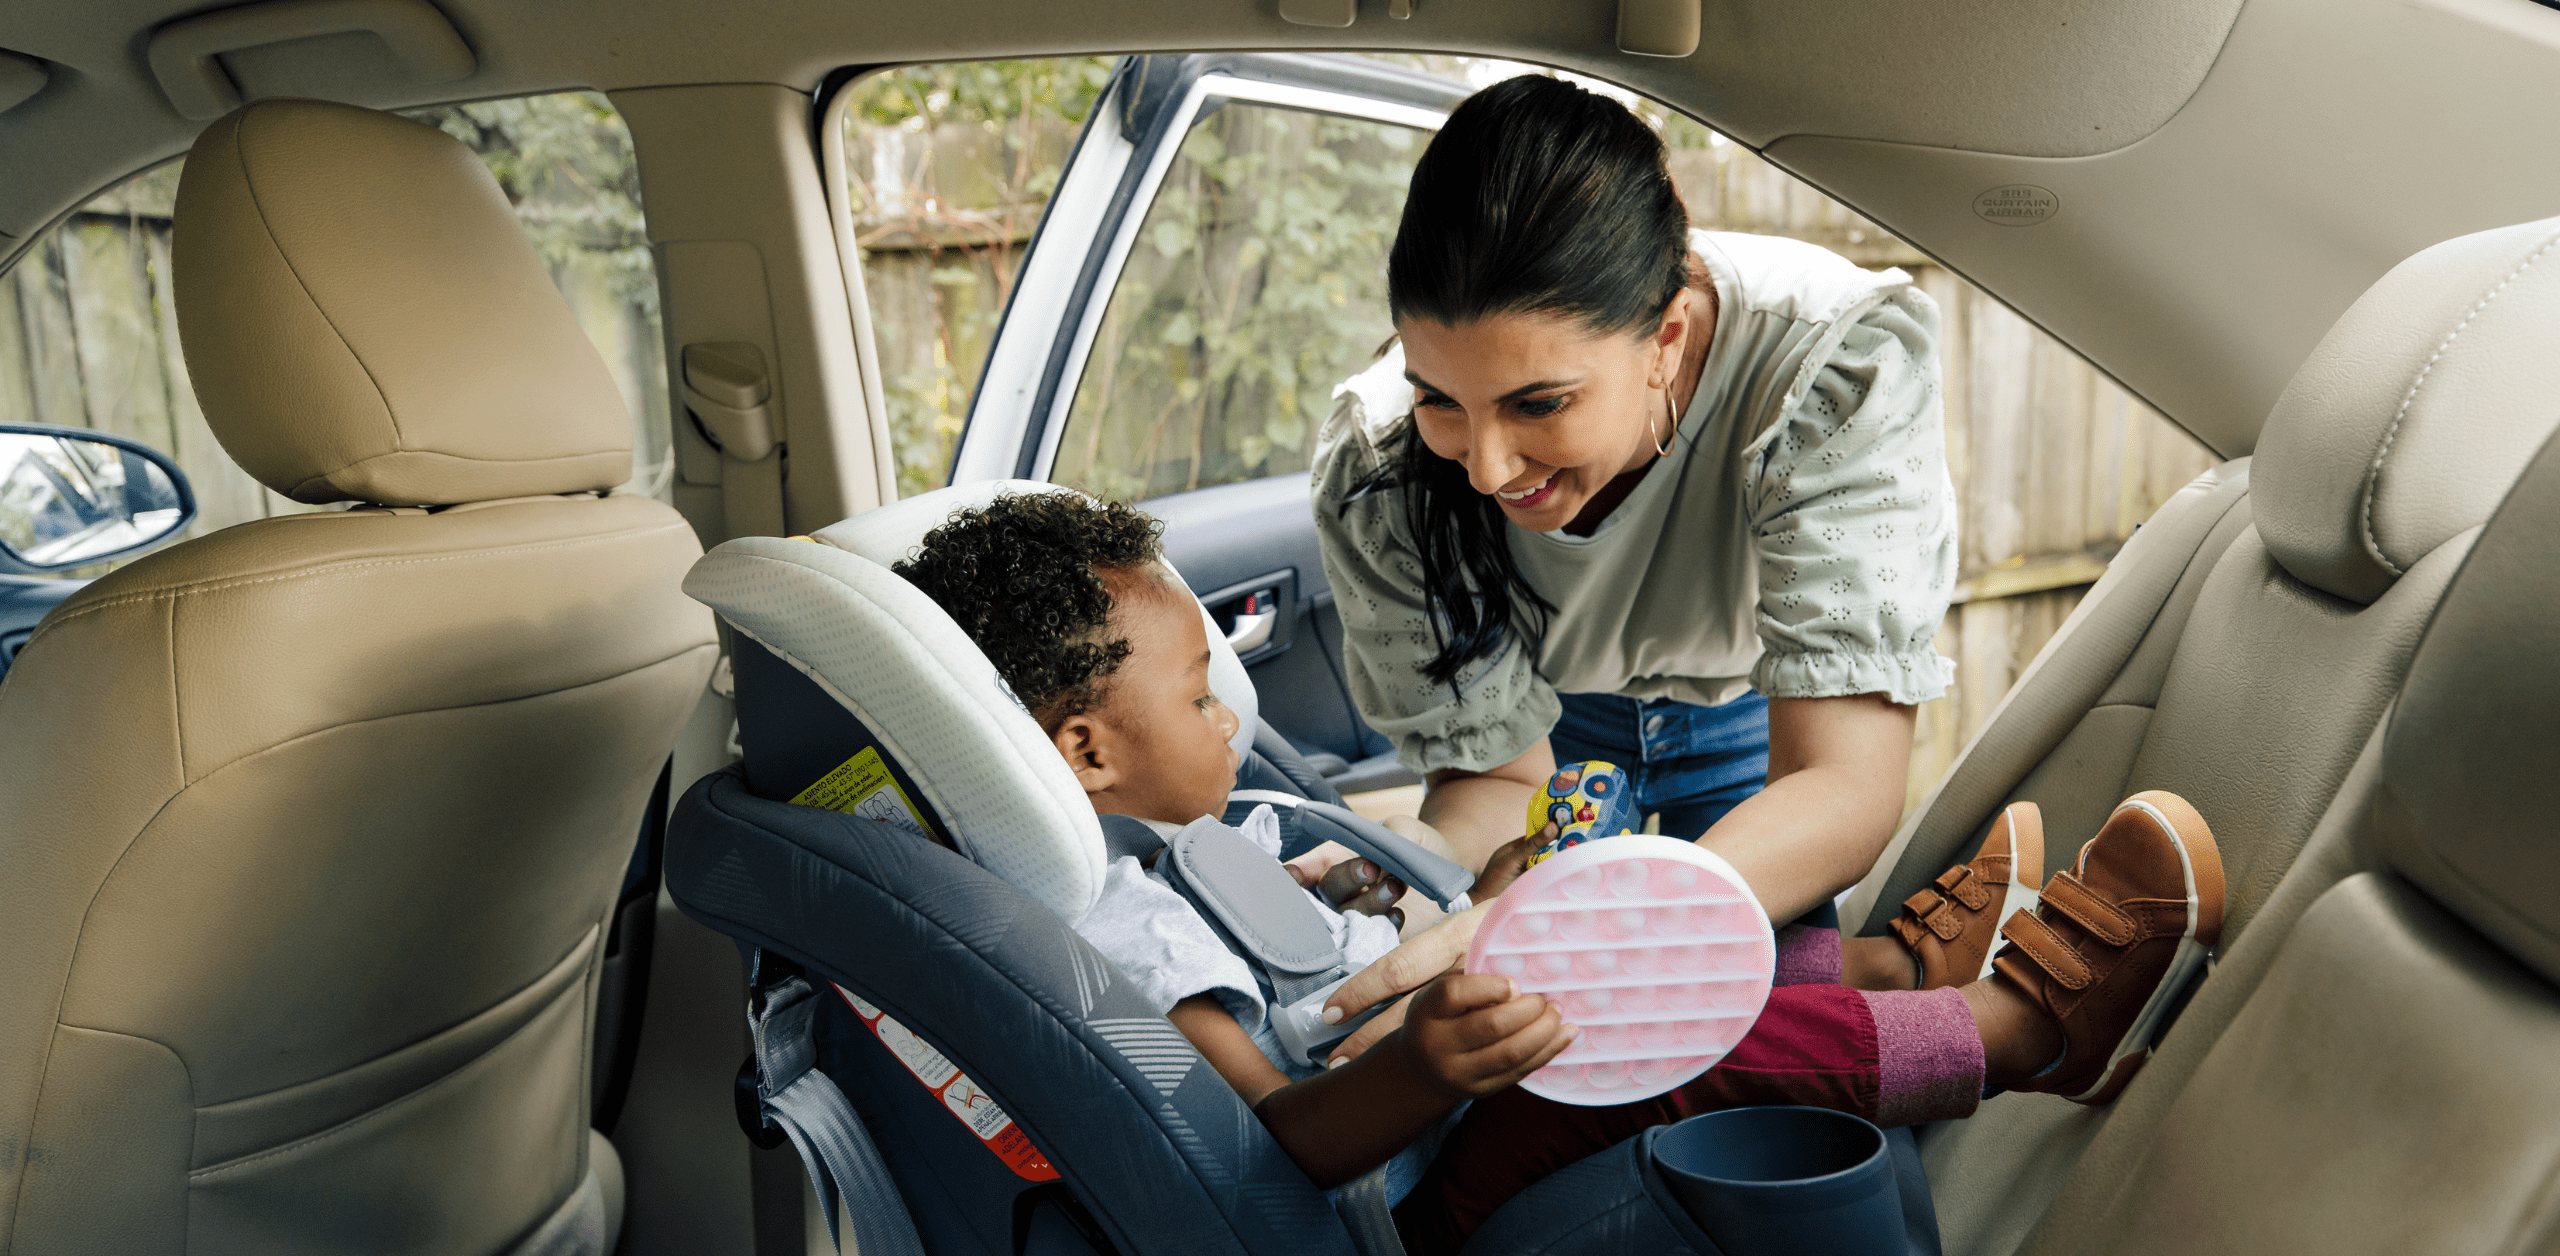 Why Aftermarket Car Seat Accessories Are So Unsafe